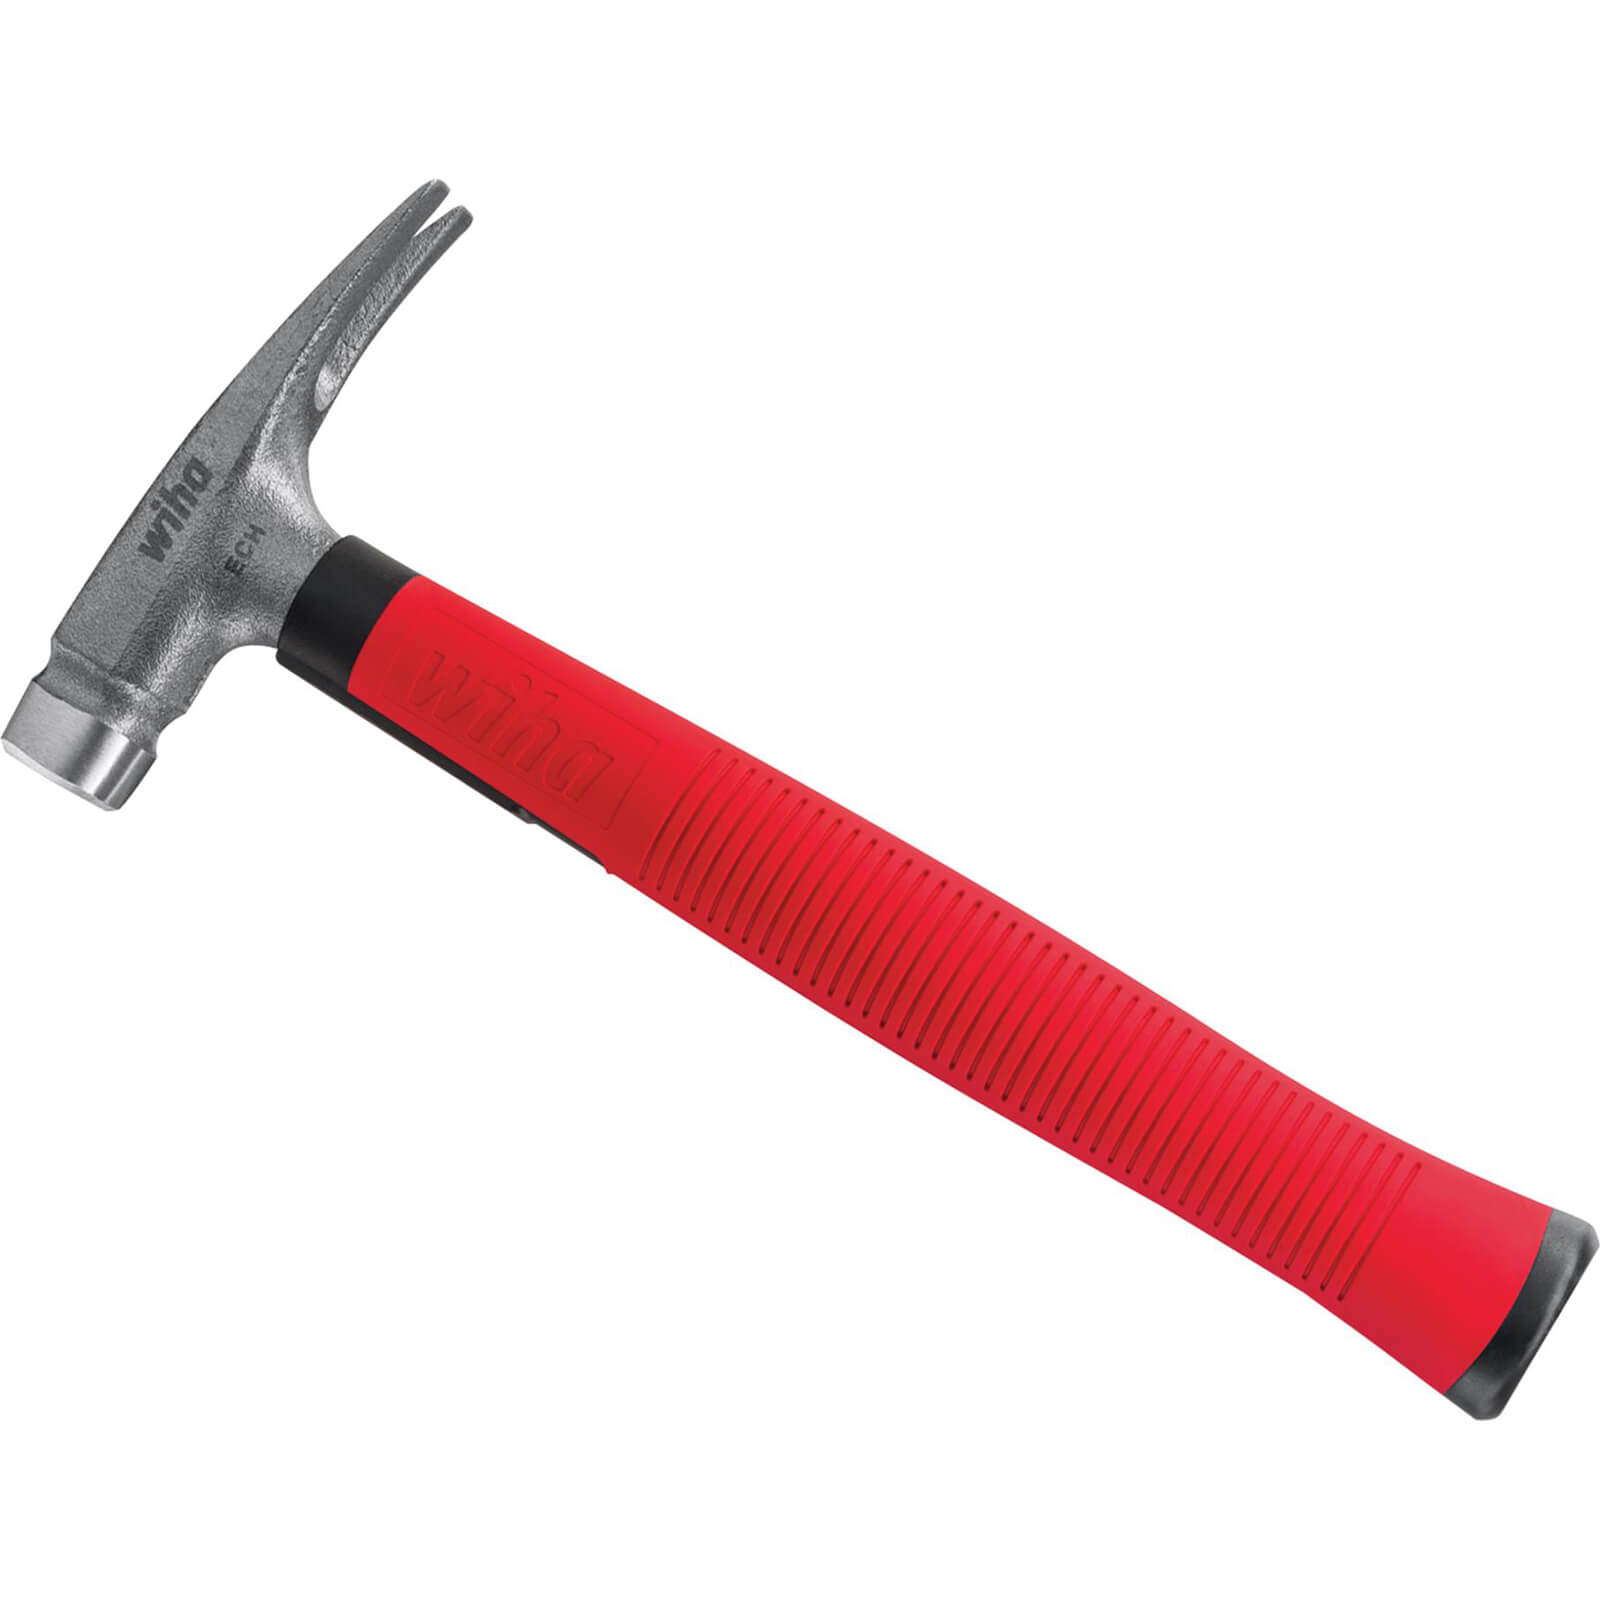 Wiha Electricians Straight Claw Hammer 300g